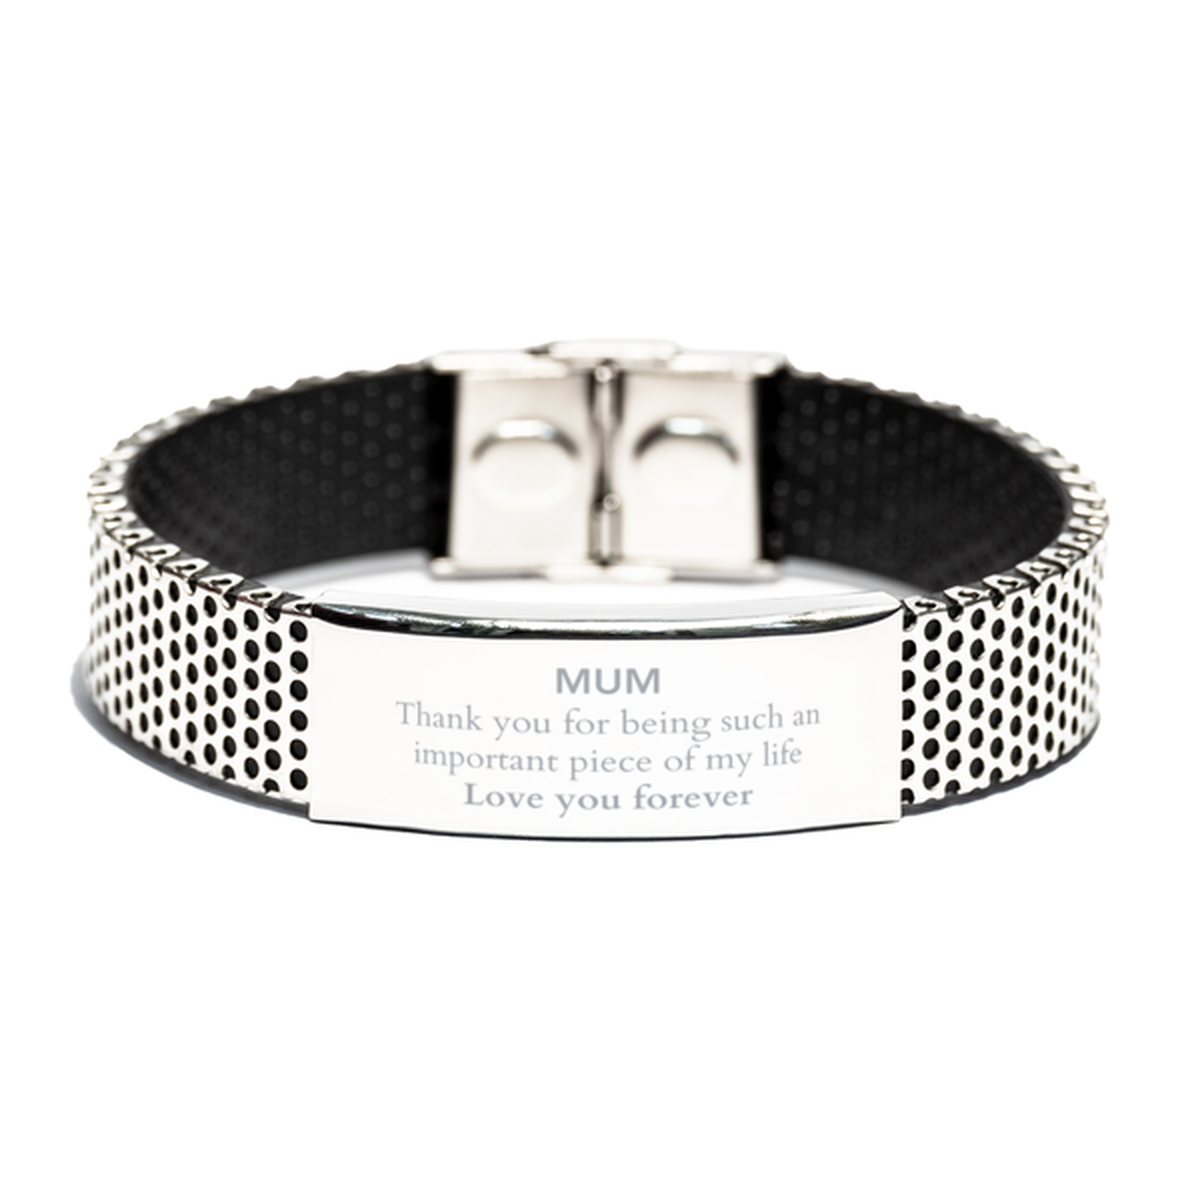 Appropriate Mum Stainless Steel Bracelet Epic Birthday Gifts for Mum Thank you for being such an important piece of my life Mum Christmas Mothers Fathers Day